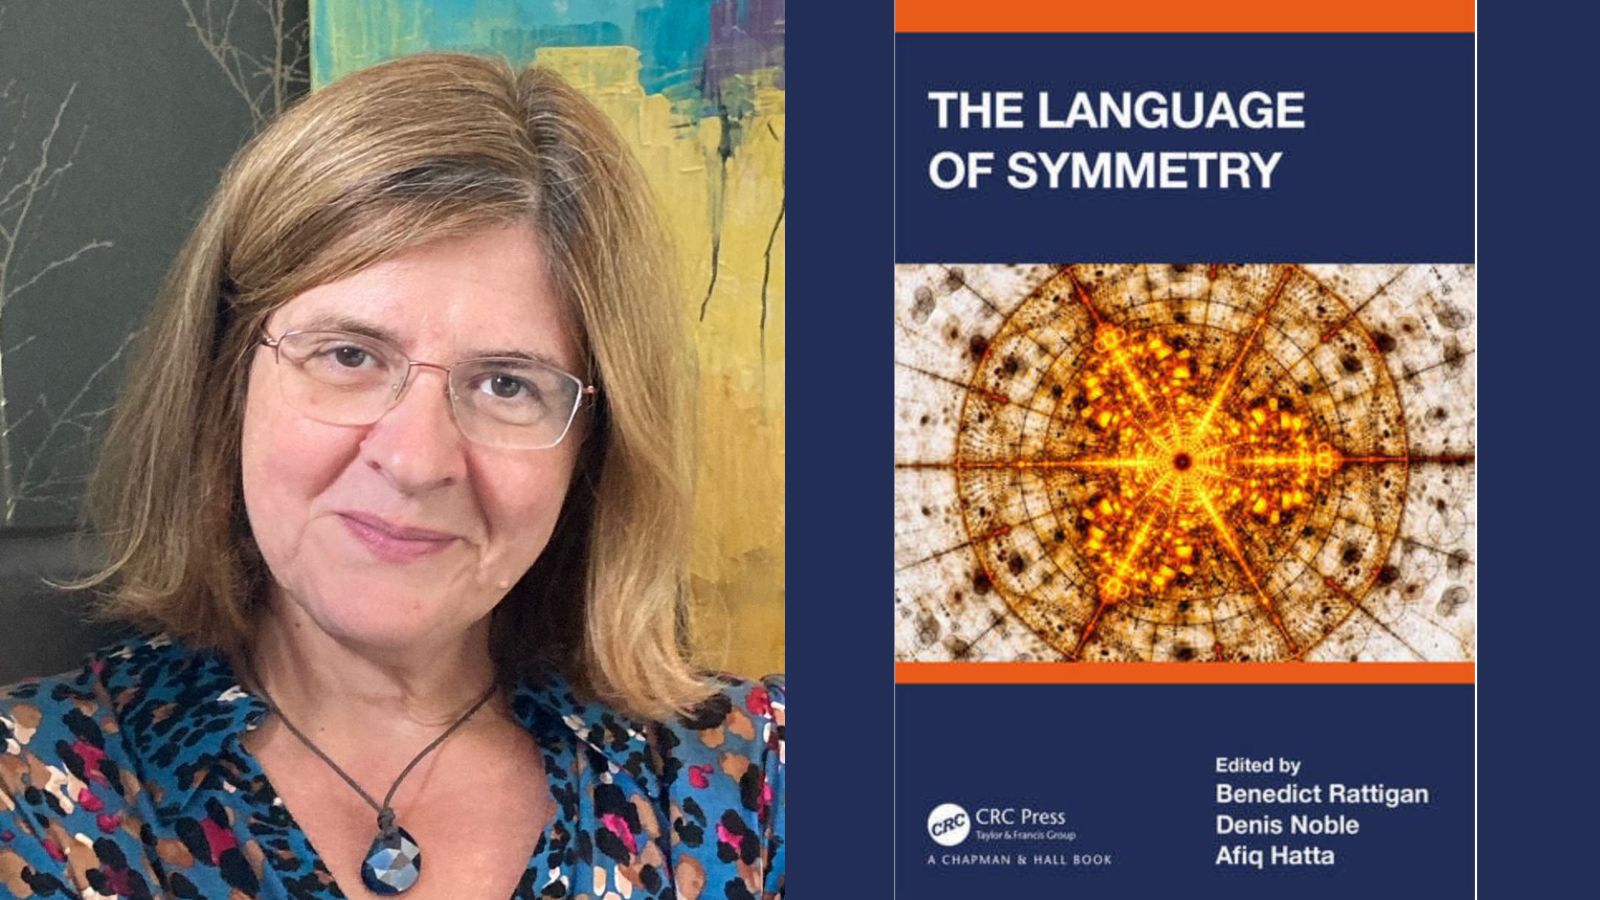 Split image showing a woman with chin length brown hair and glasses next to the cover of a book called 'The Language of Symmetry'